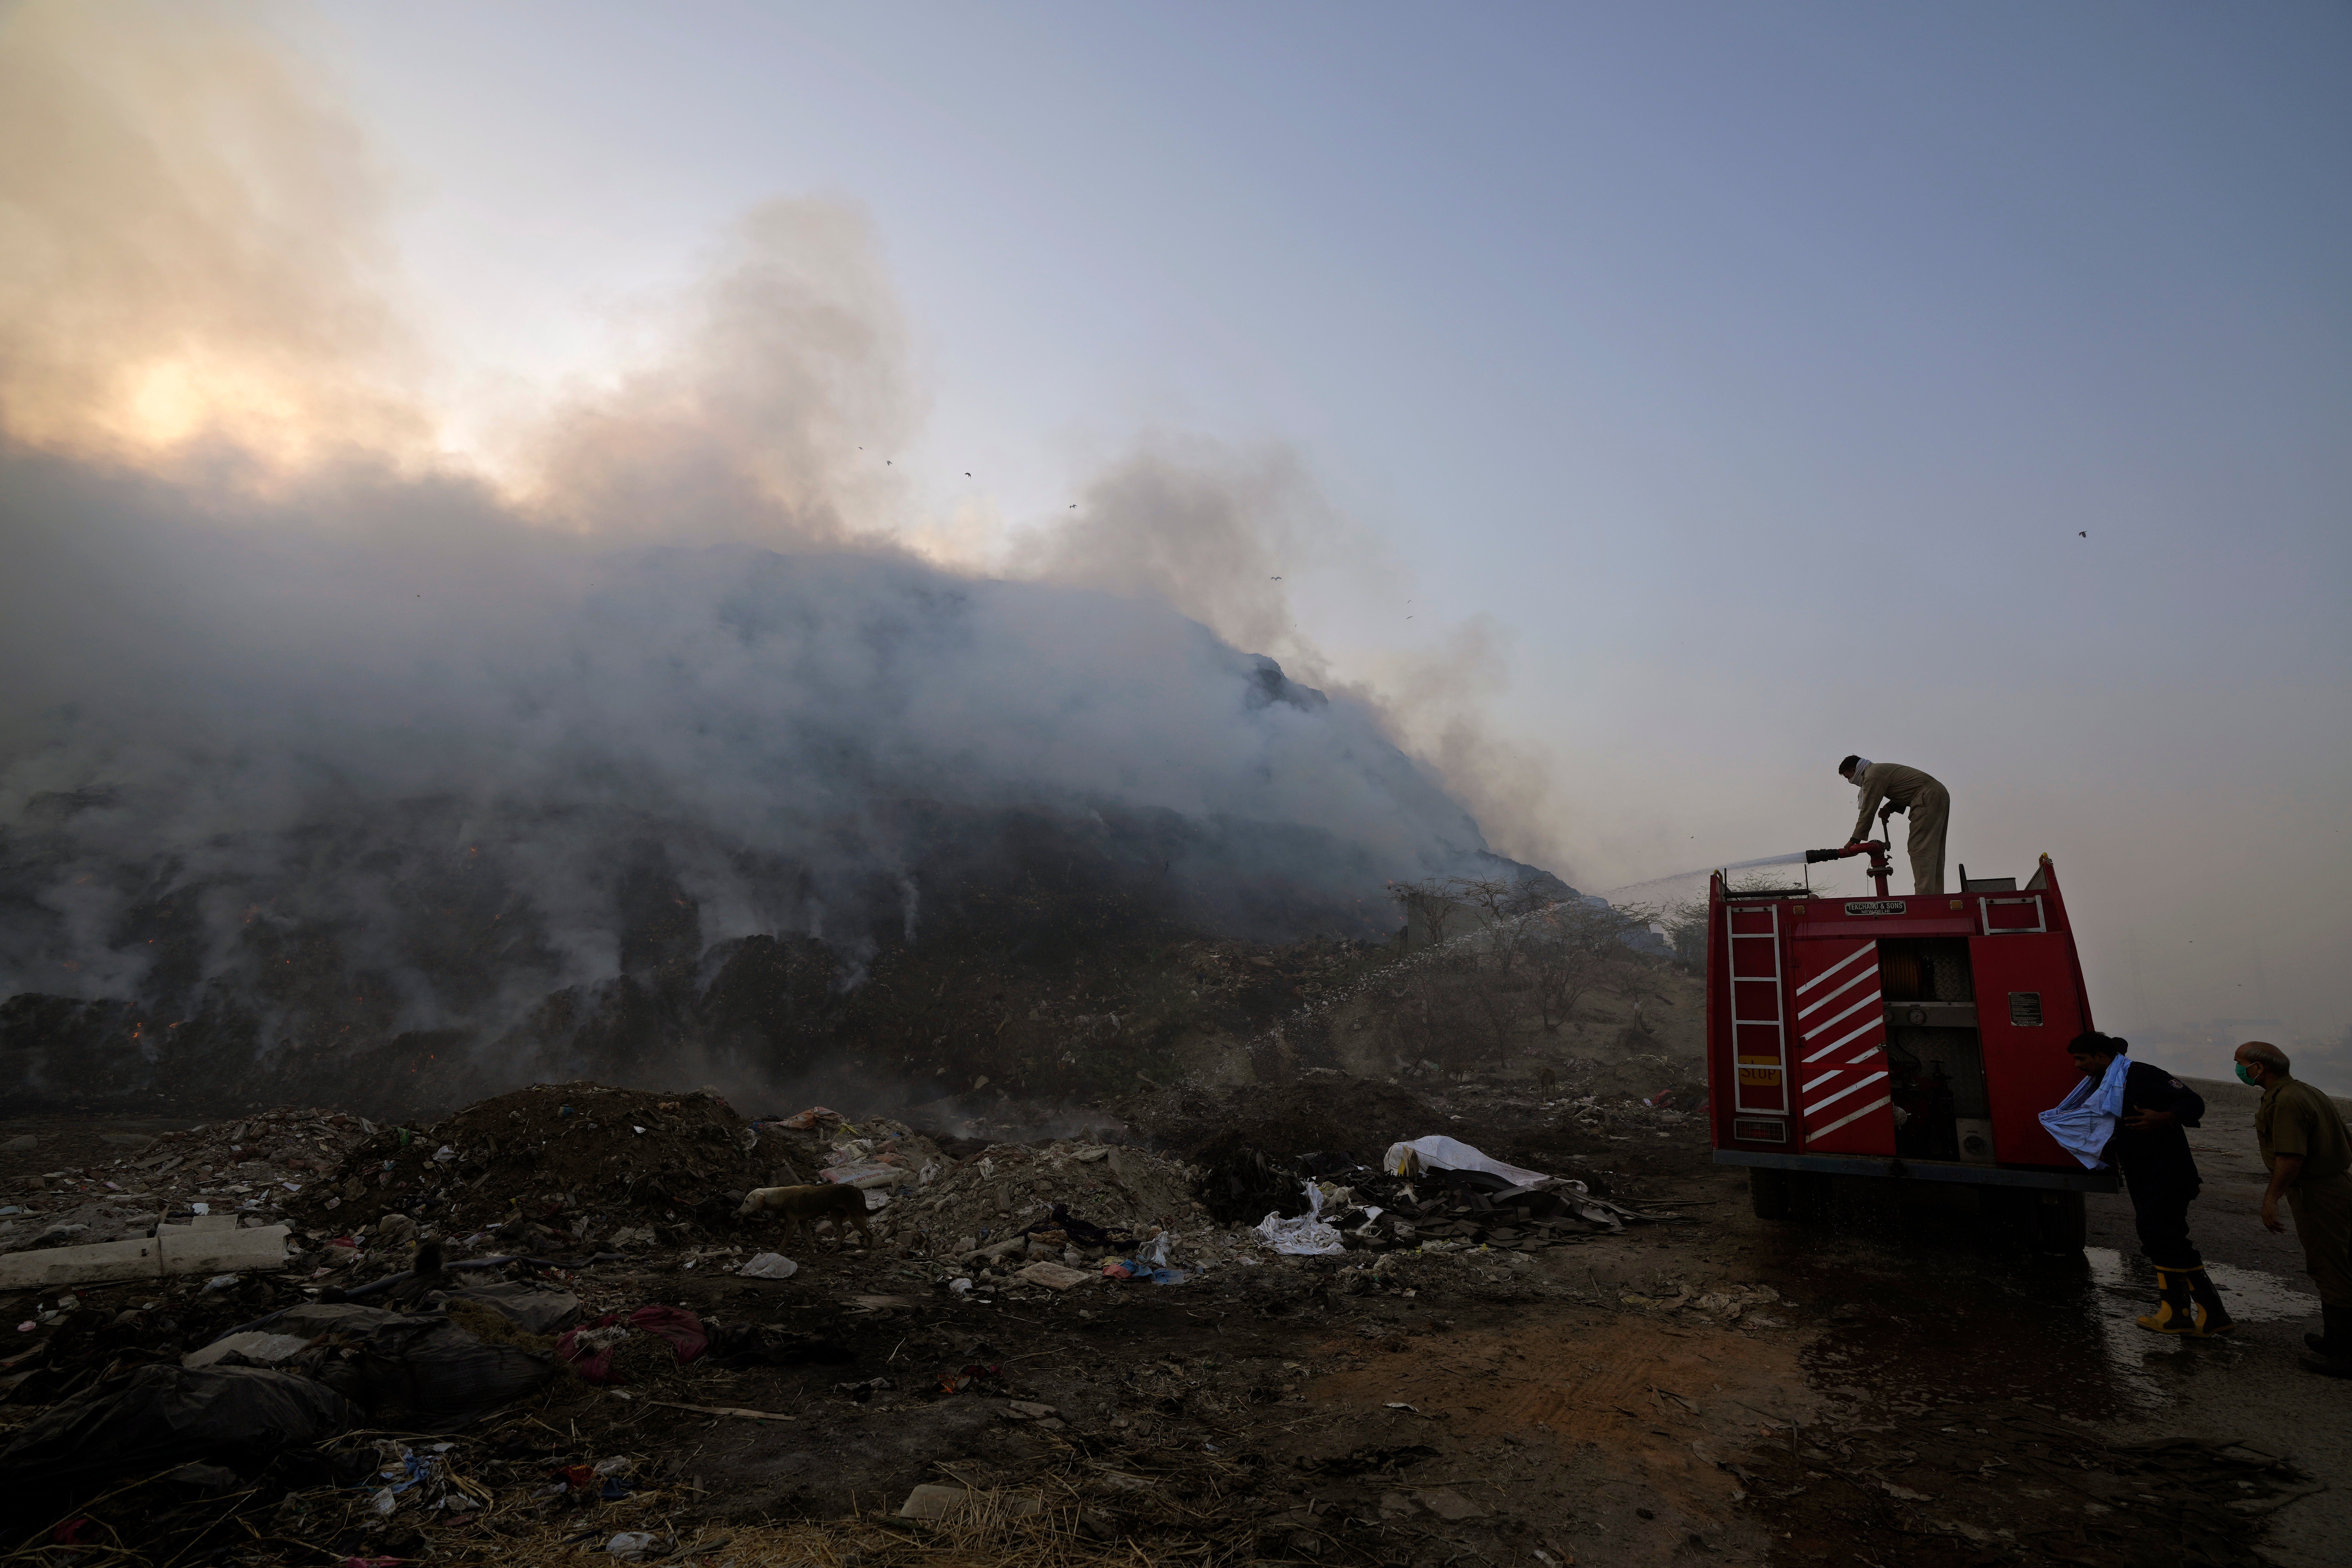 Firefighters attempt to put out the blaze on April 27. (Photo: Manish Swarup, AP)